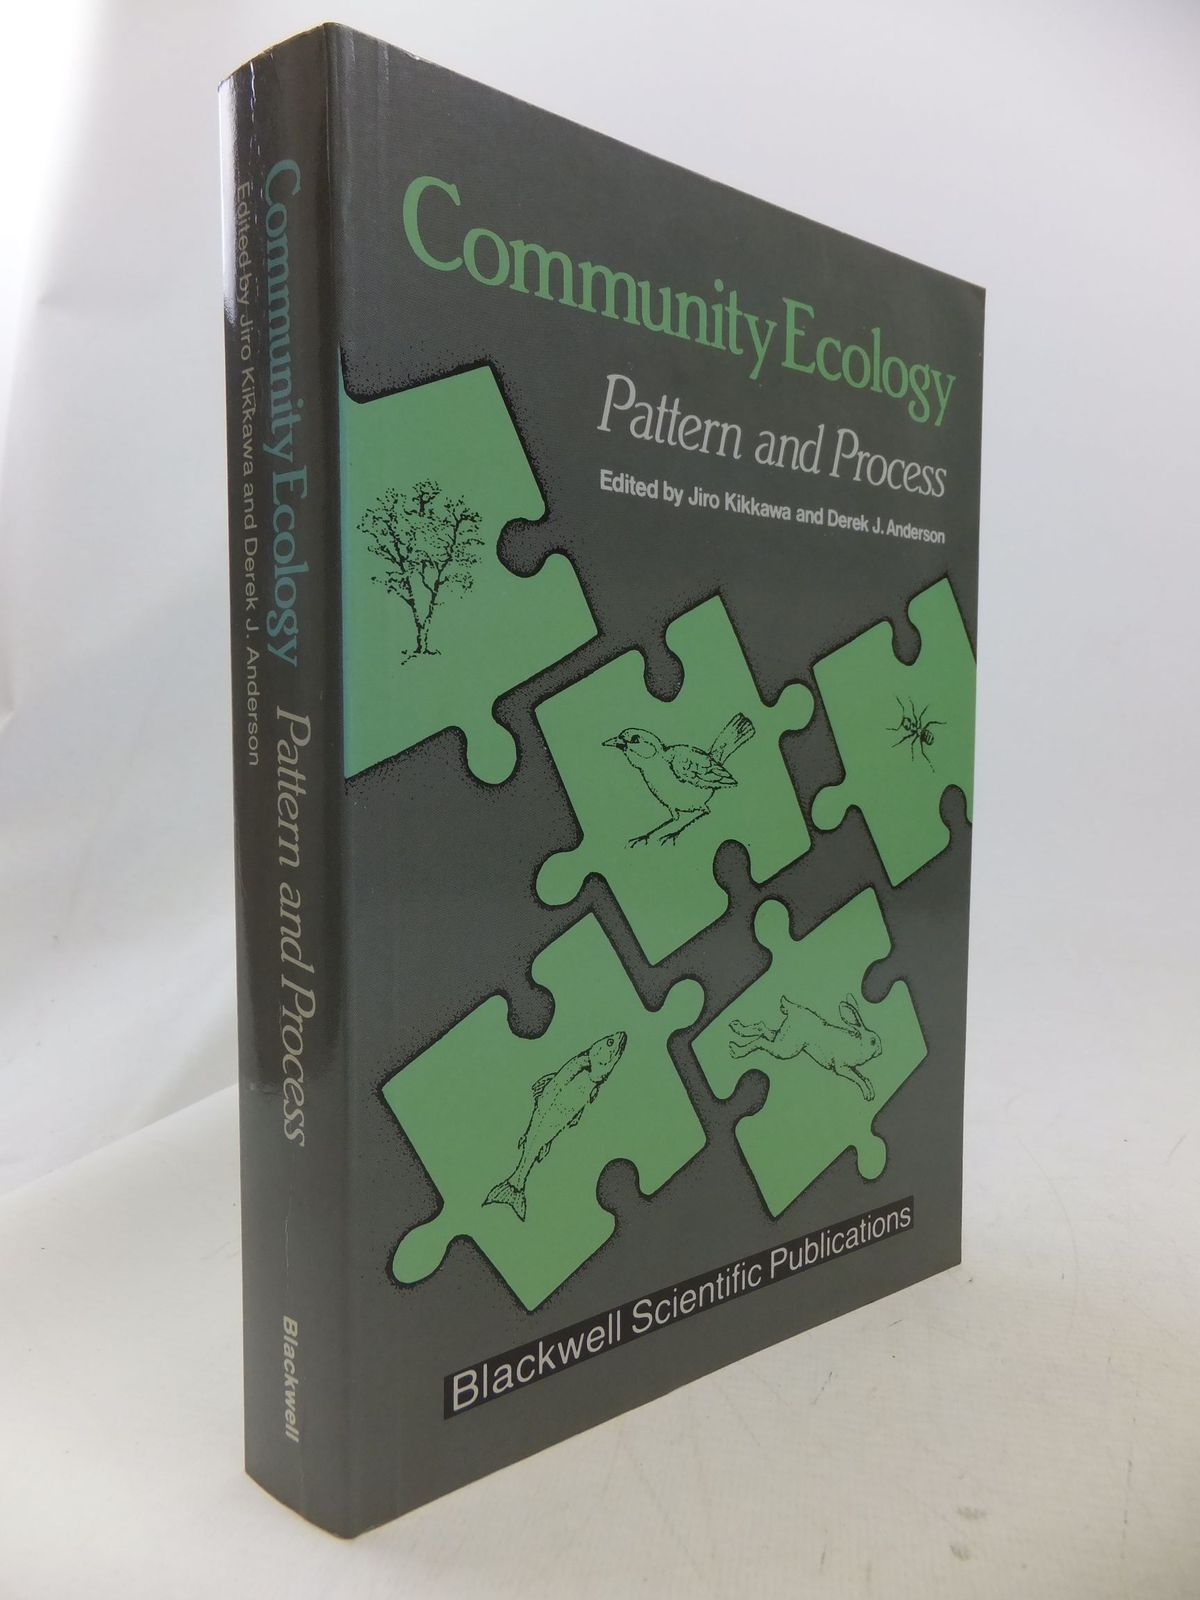 Photo of COMMUNITY ECOLOGY PATTERN AND PROCESS written by Kikkawa, Jiro Anderson, Derek J. published by Blackwell Scientific Publications (STOCK CODE: 1710836)  for sale by Stella & Rose's Books